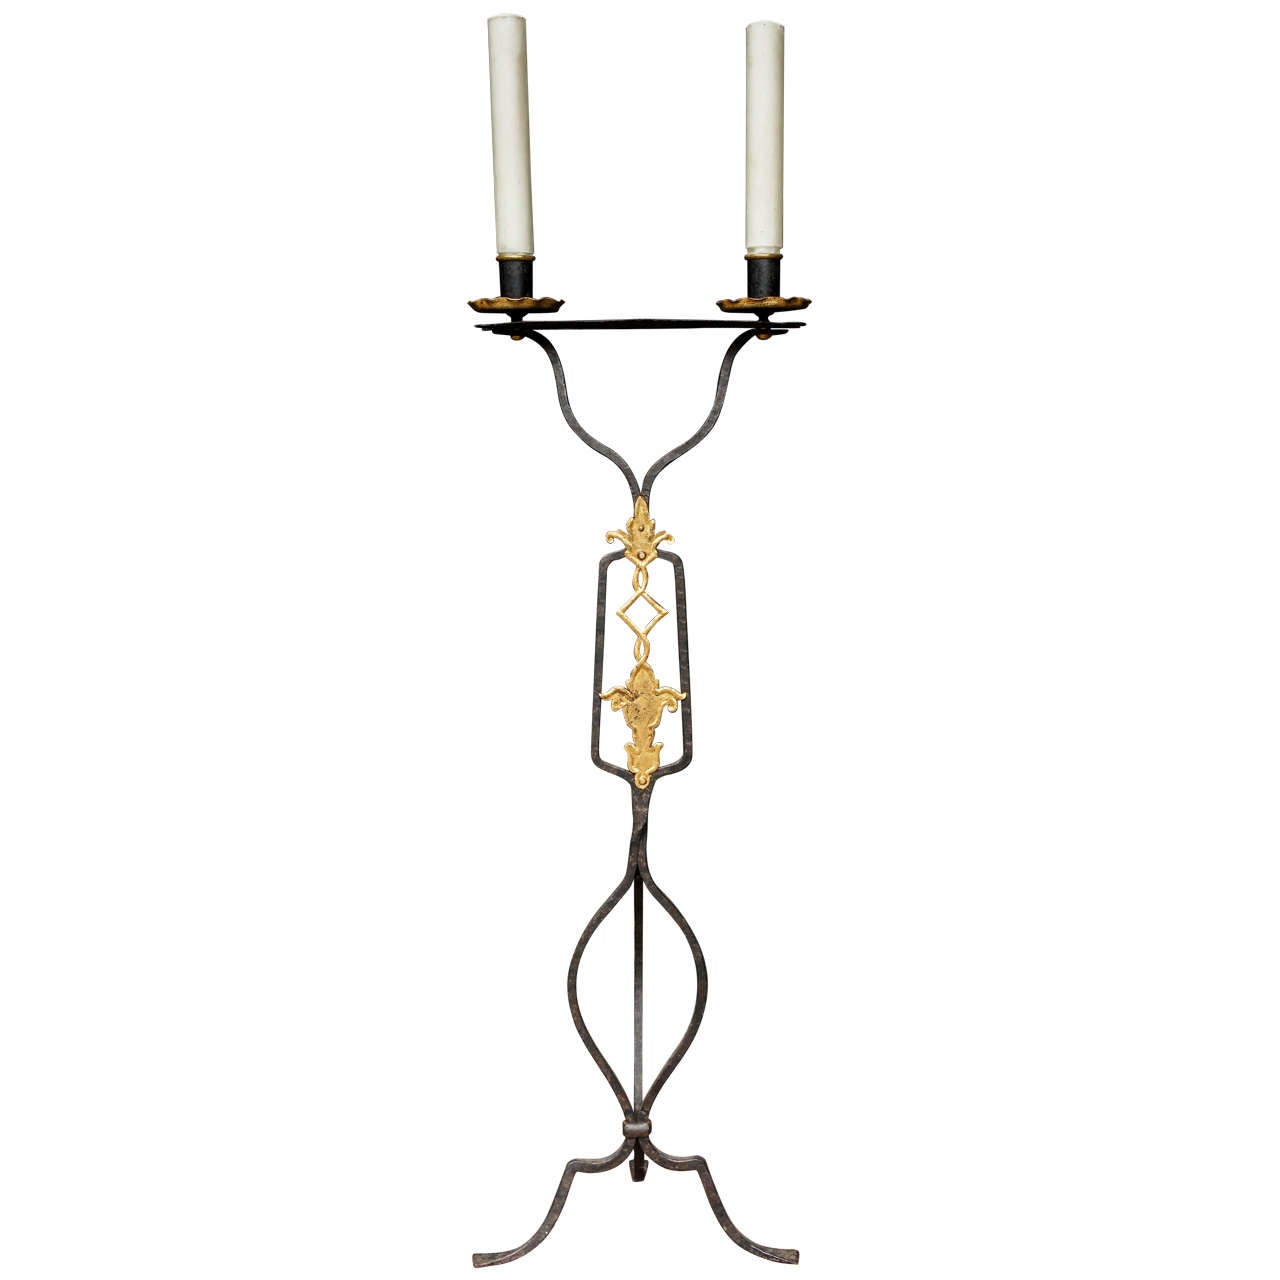 An Early 20th Century Wrought Iron Floor Candleabra